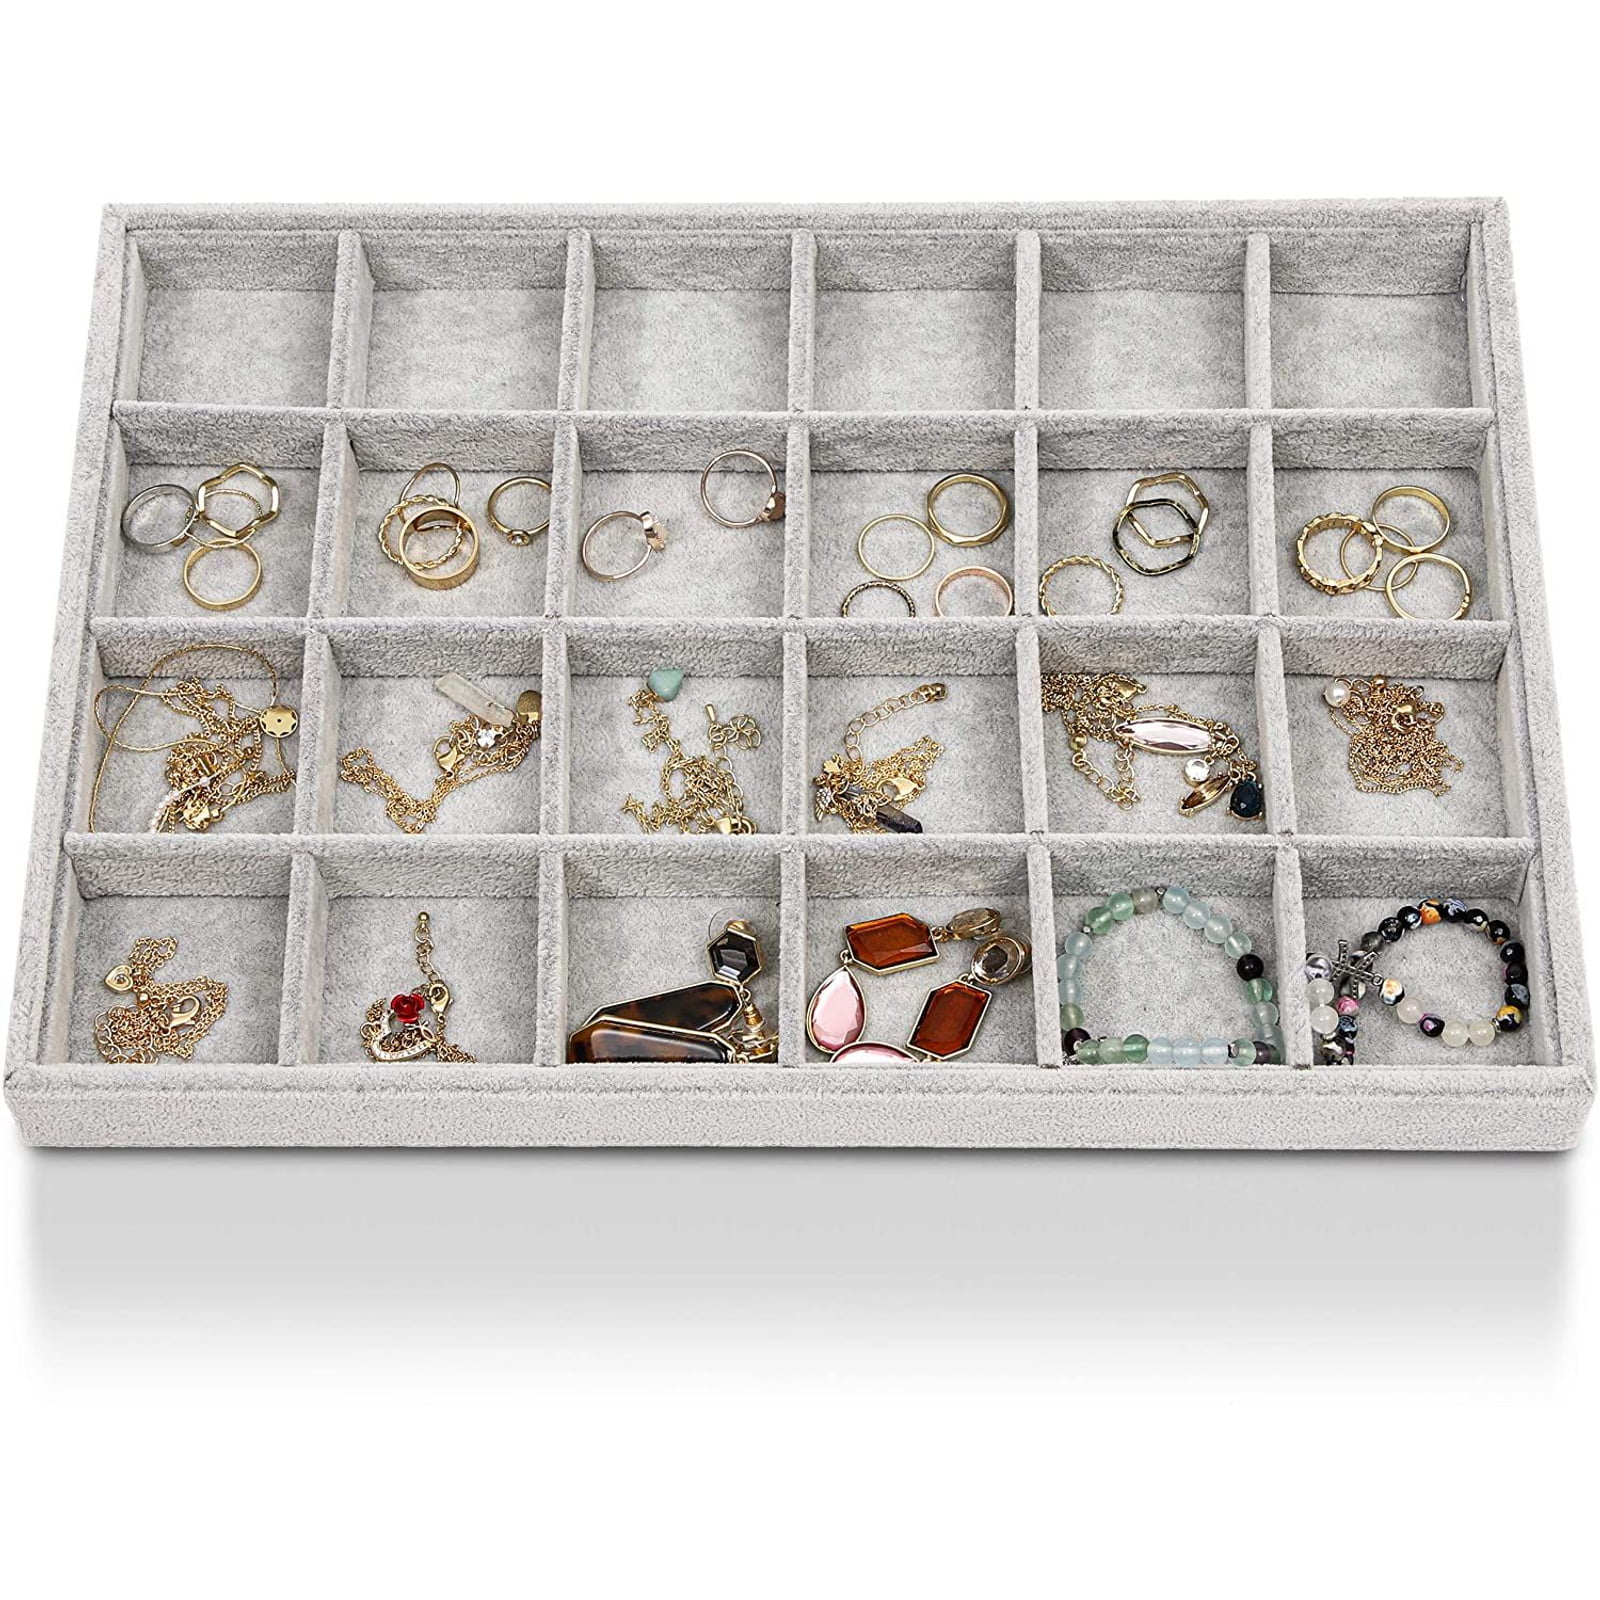 24 Grid Jewelry Container Storage Box Bead Earring Organizer Case Display Hot 